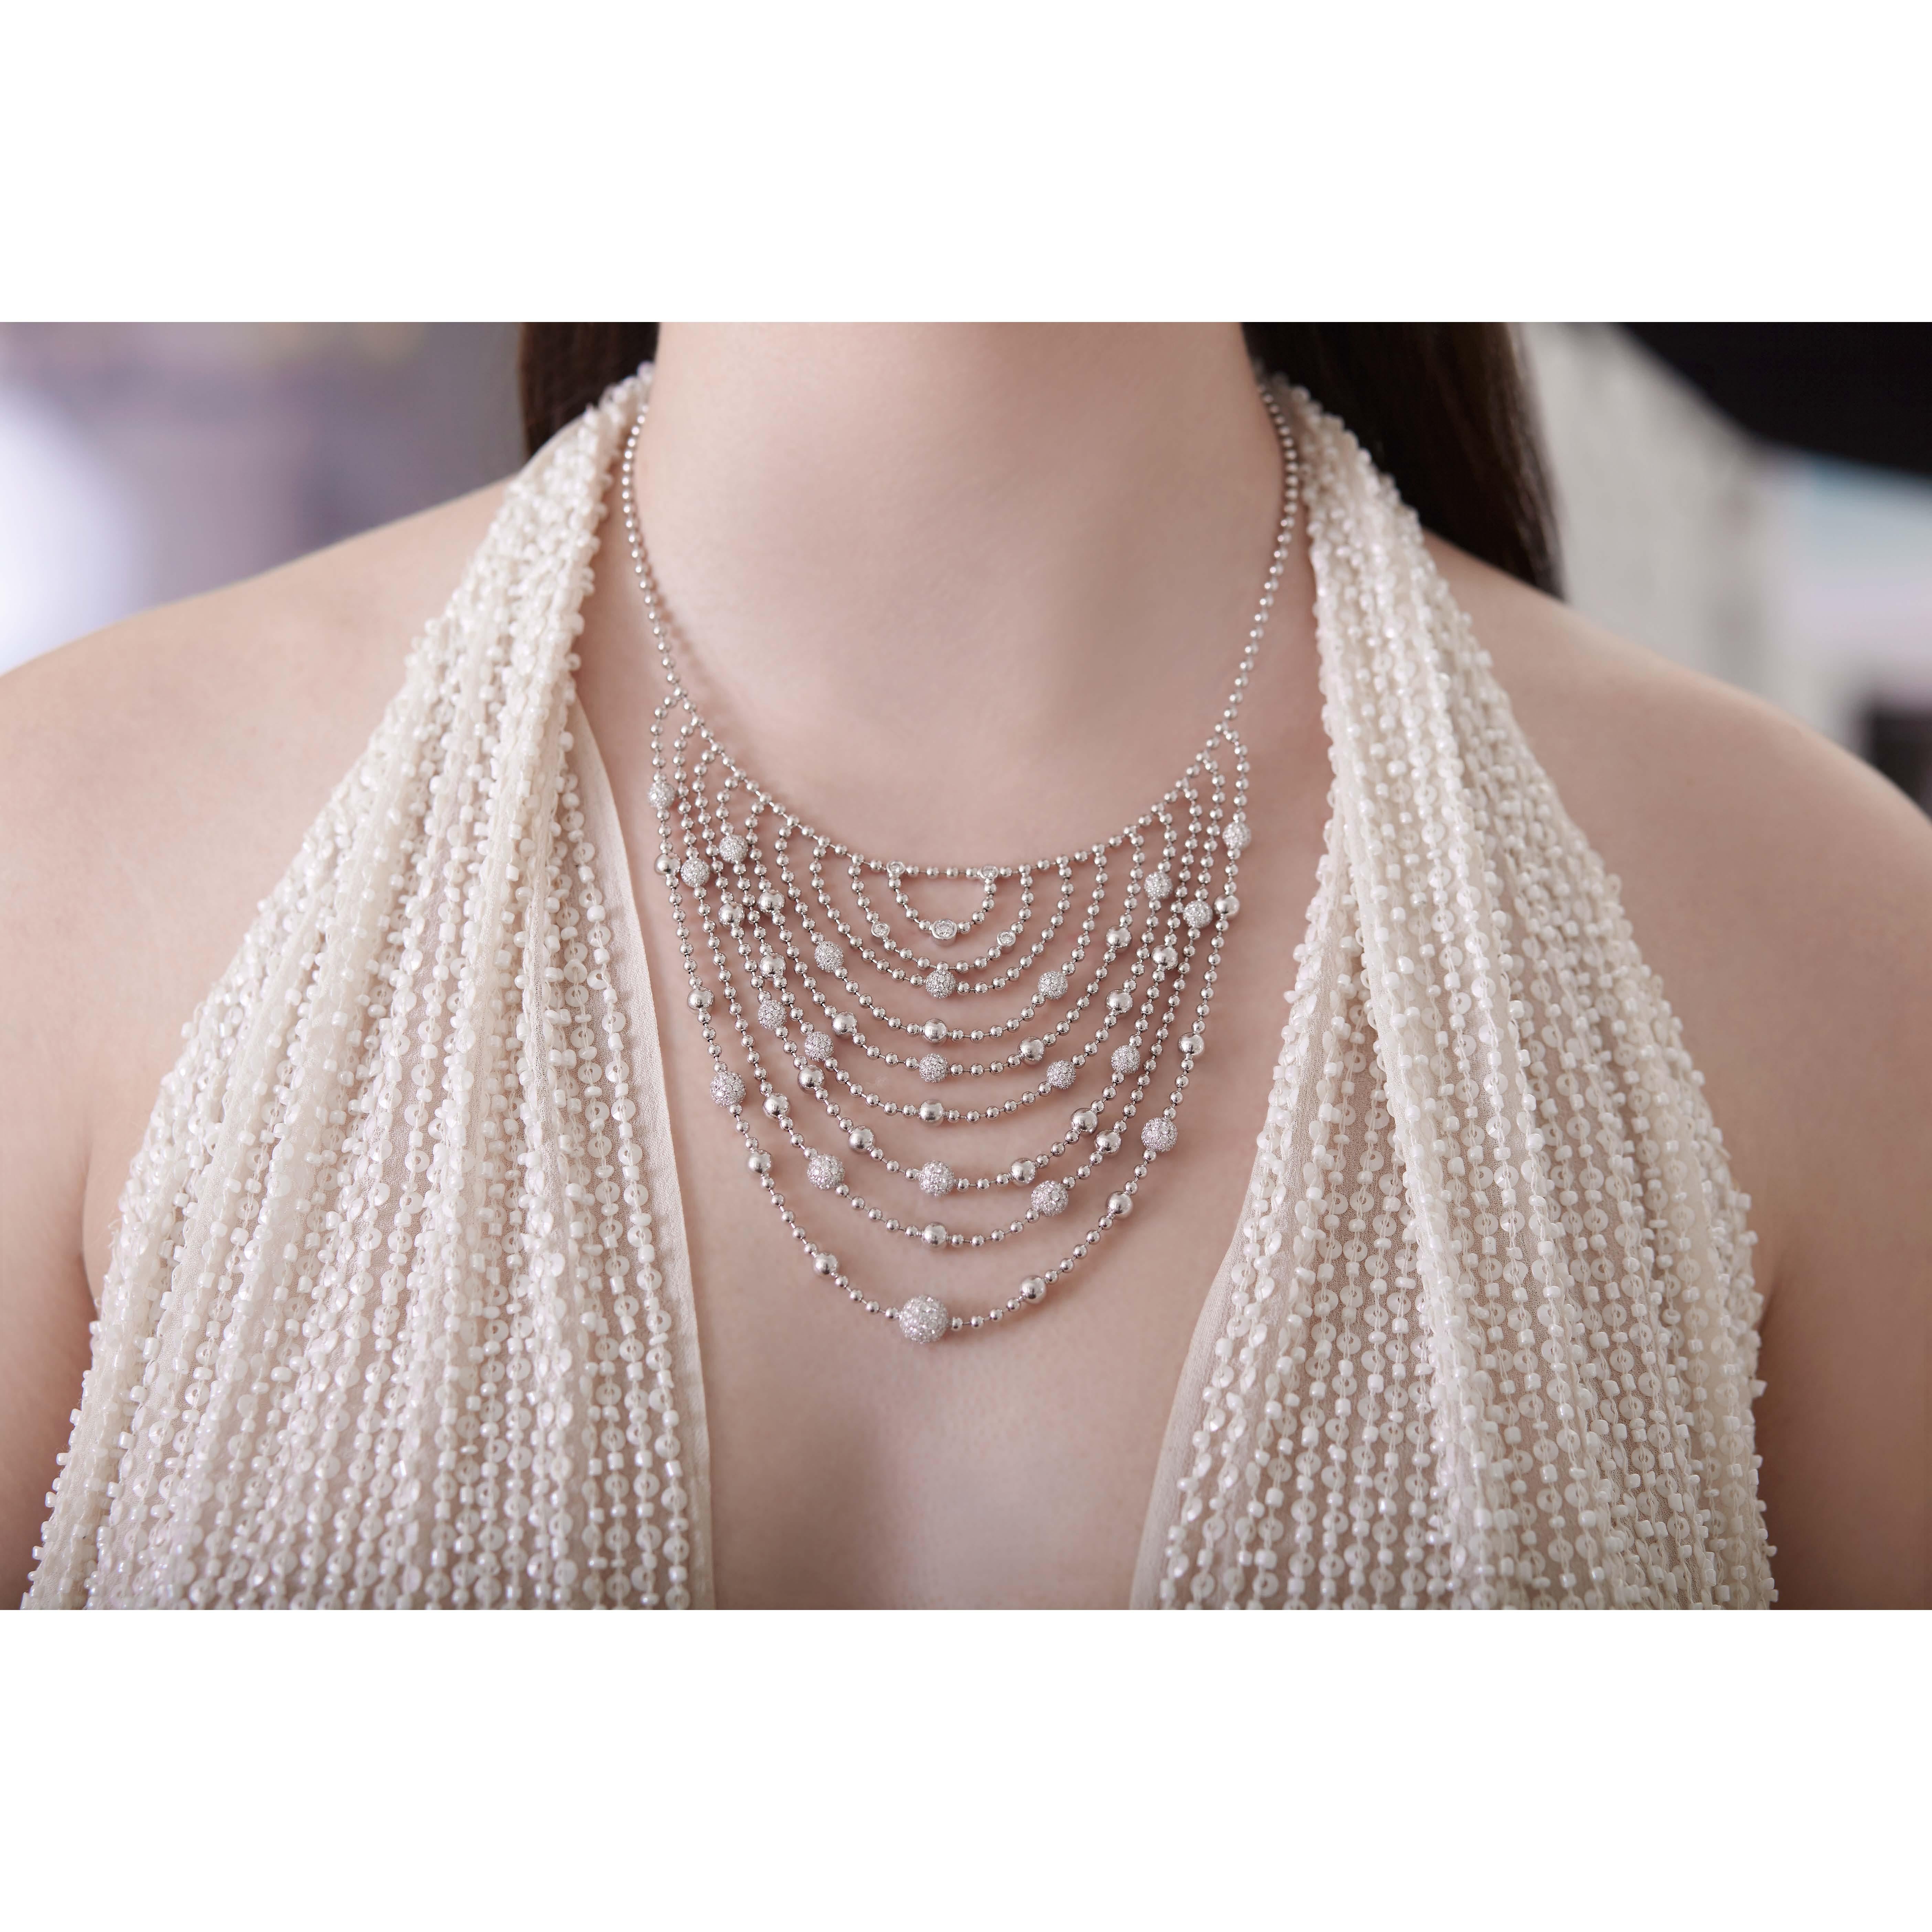 Silky 18K gold ball chain drapes dramatically, filling your neckline. Each slinky swag has stations of pave diamond spheres, bezel-set diamonds, and spheres of 18K gold in a pleasing rhythm.  Wear it inside a collar for the perfect subtle layers or